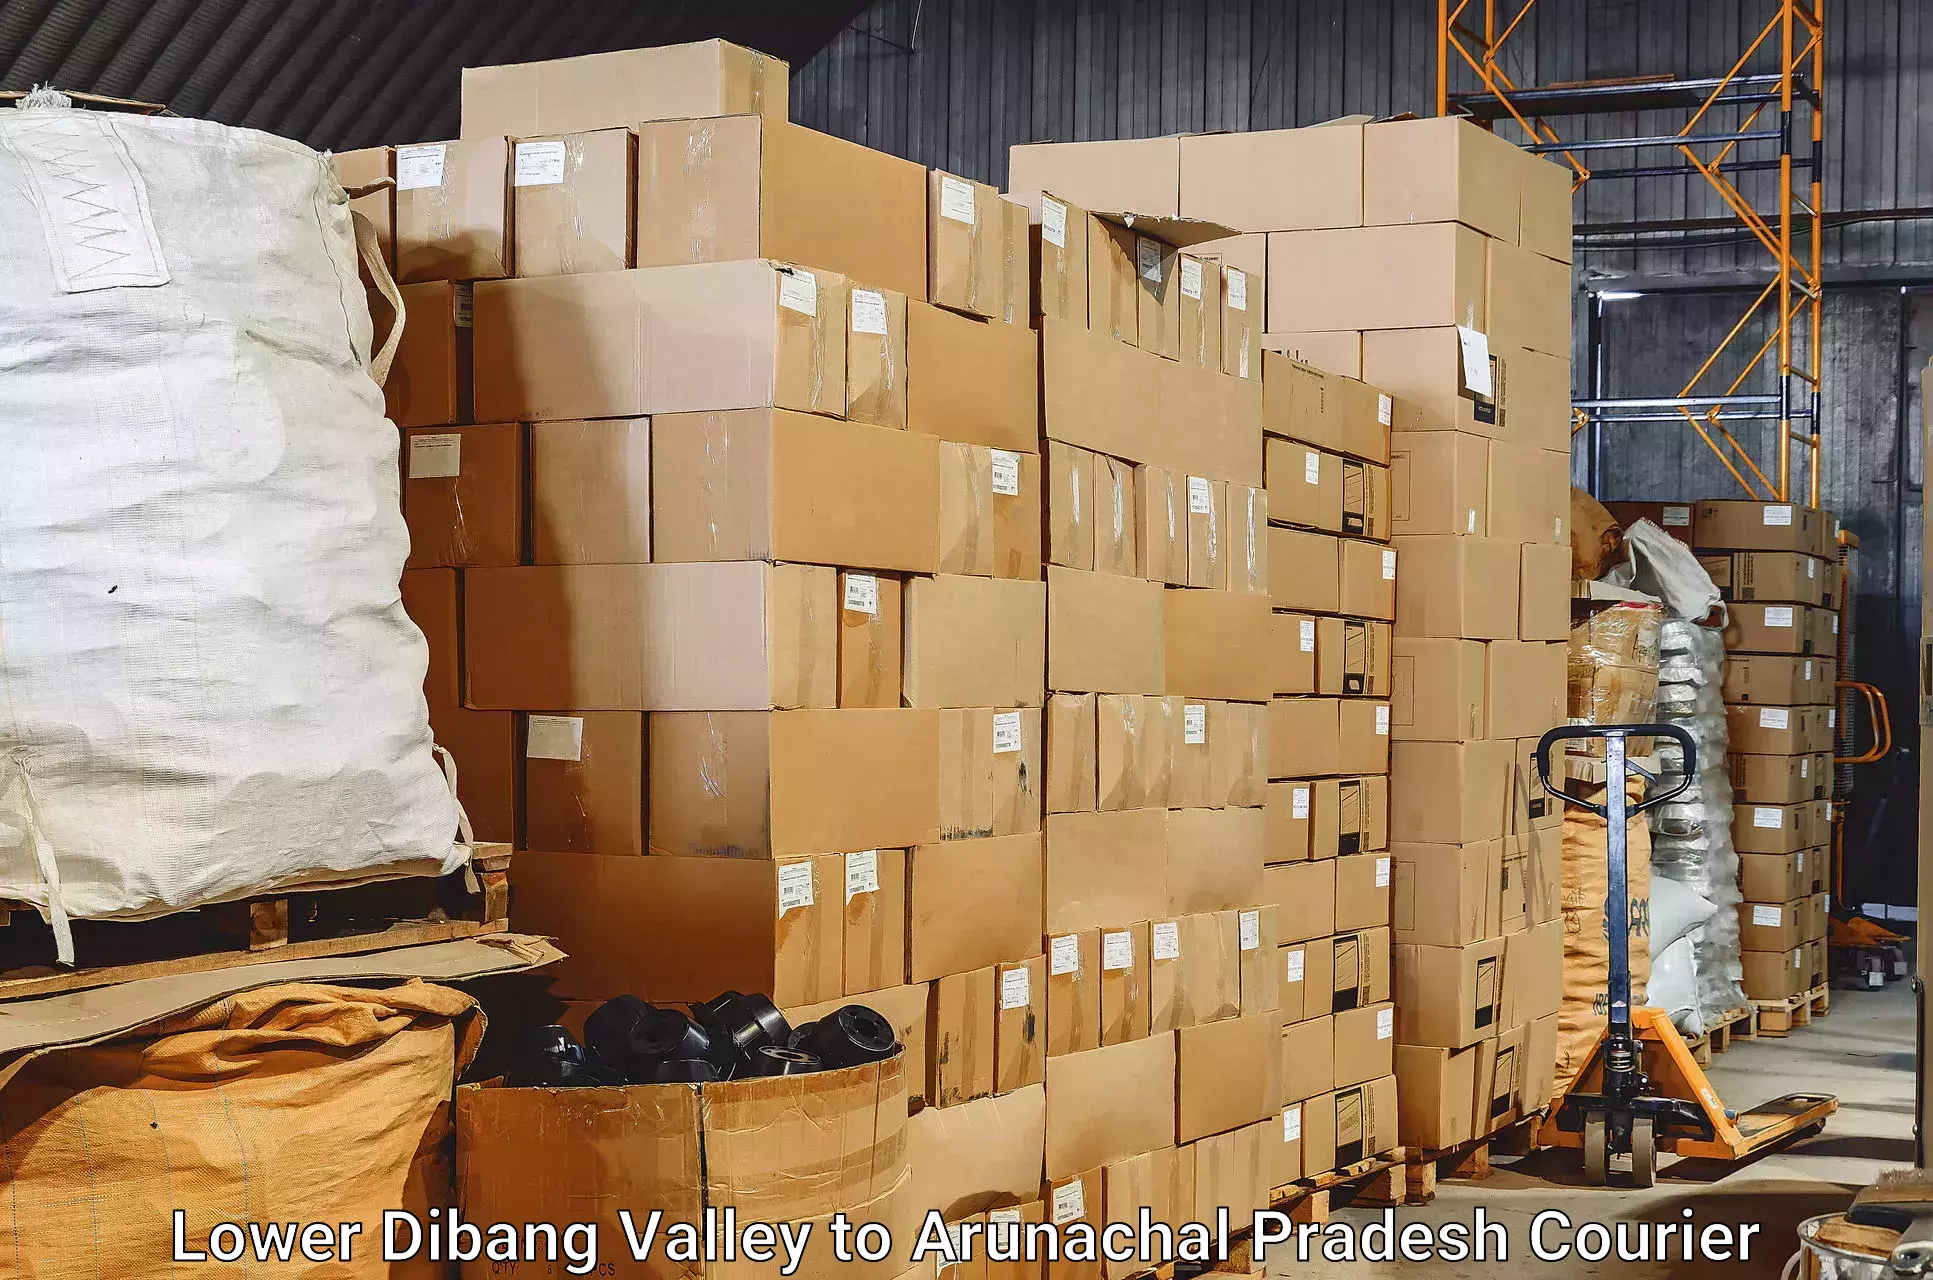 Baggage transport technology in Lower Dibang Valley to Upper Subansiri